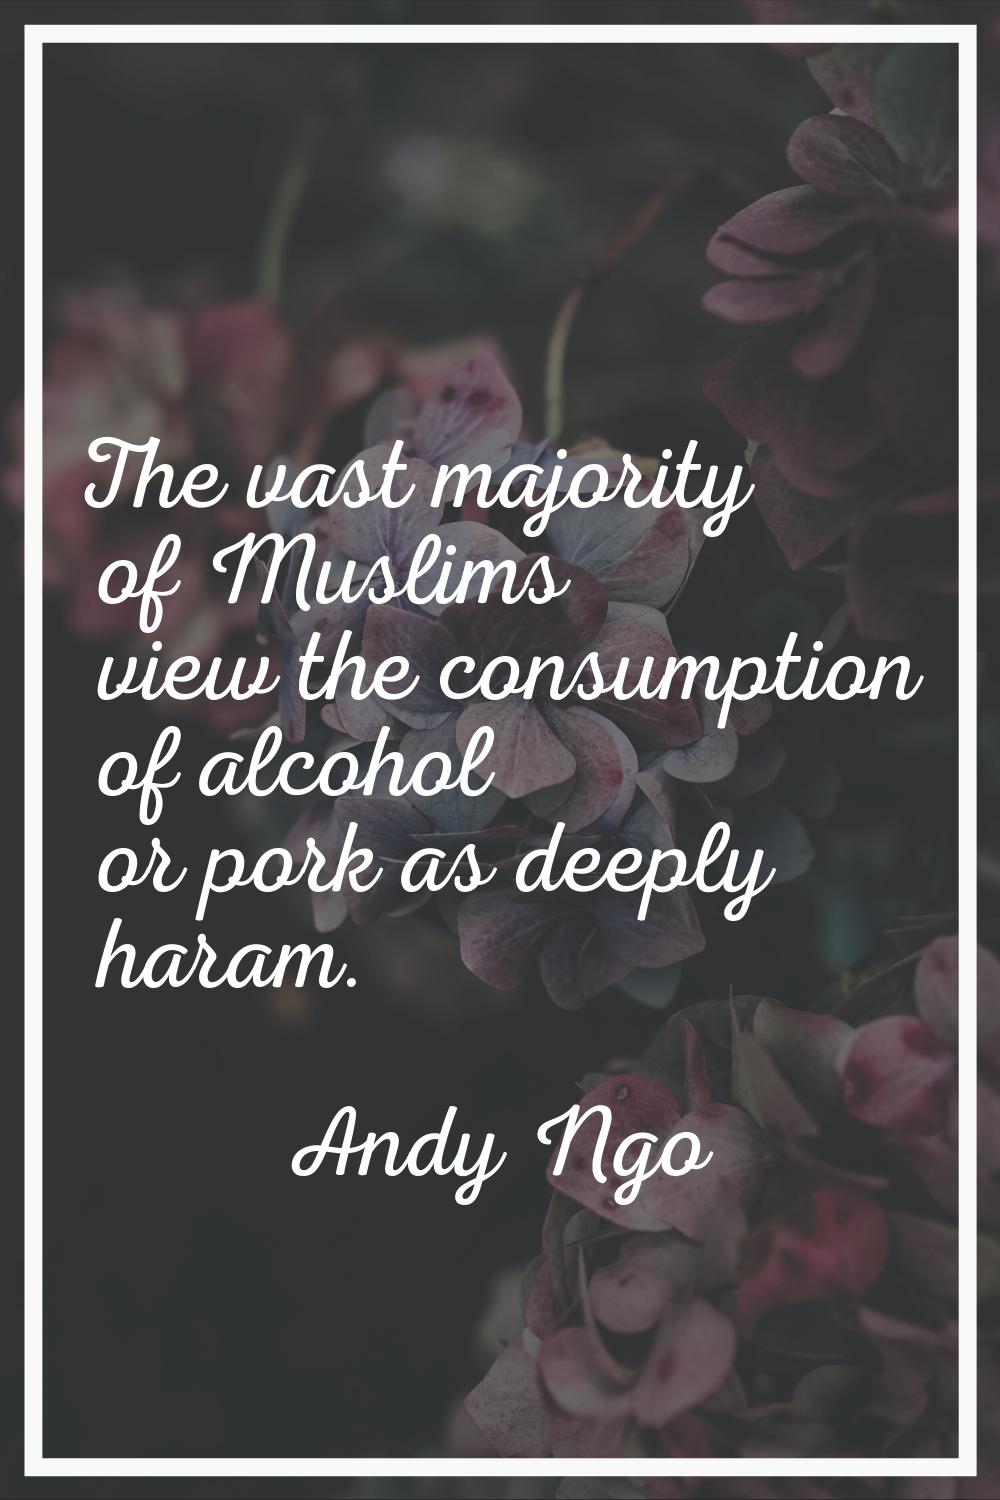 The vast majority of Muslims view the consumption of alcohol or pork as deeply haram.